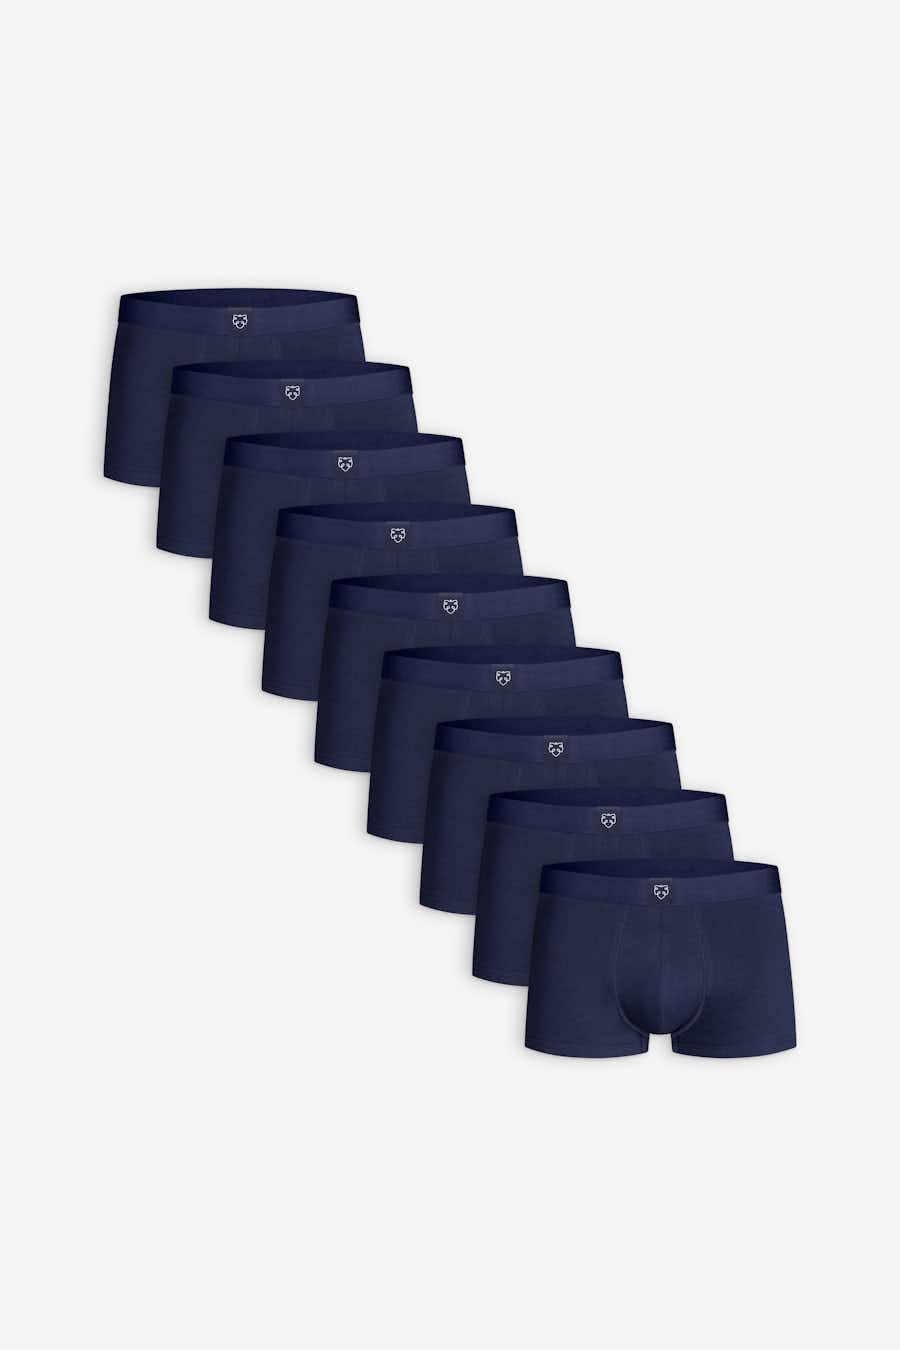 9xSolid Navy Trunks